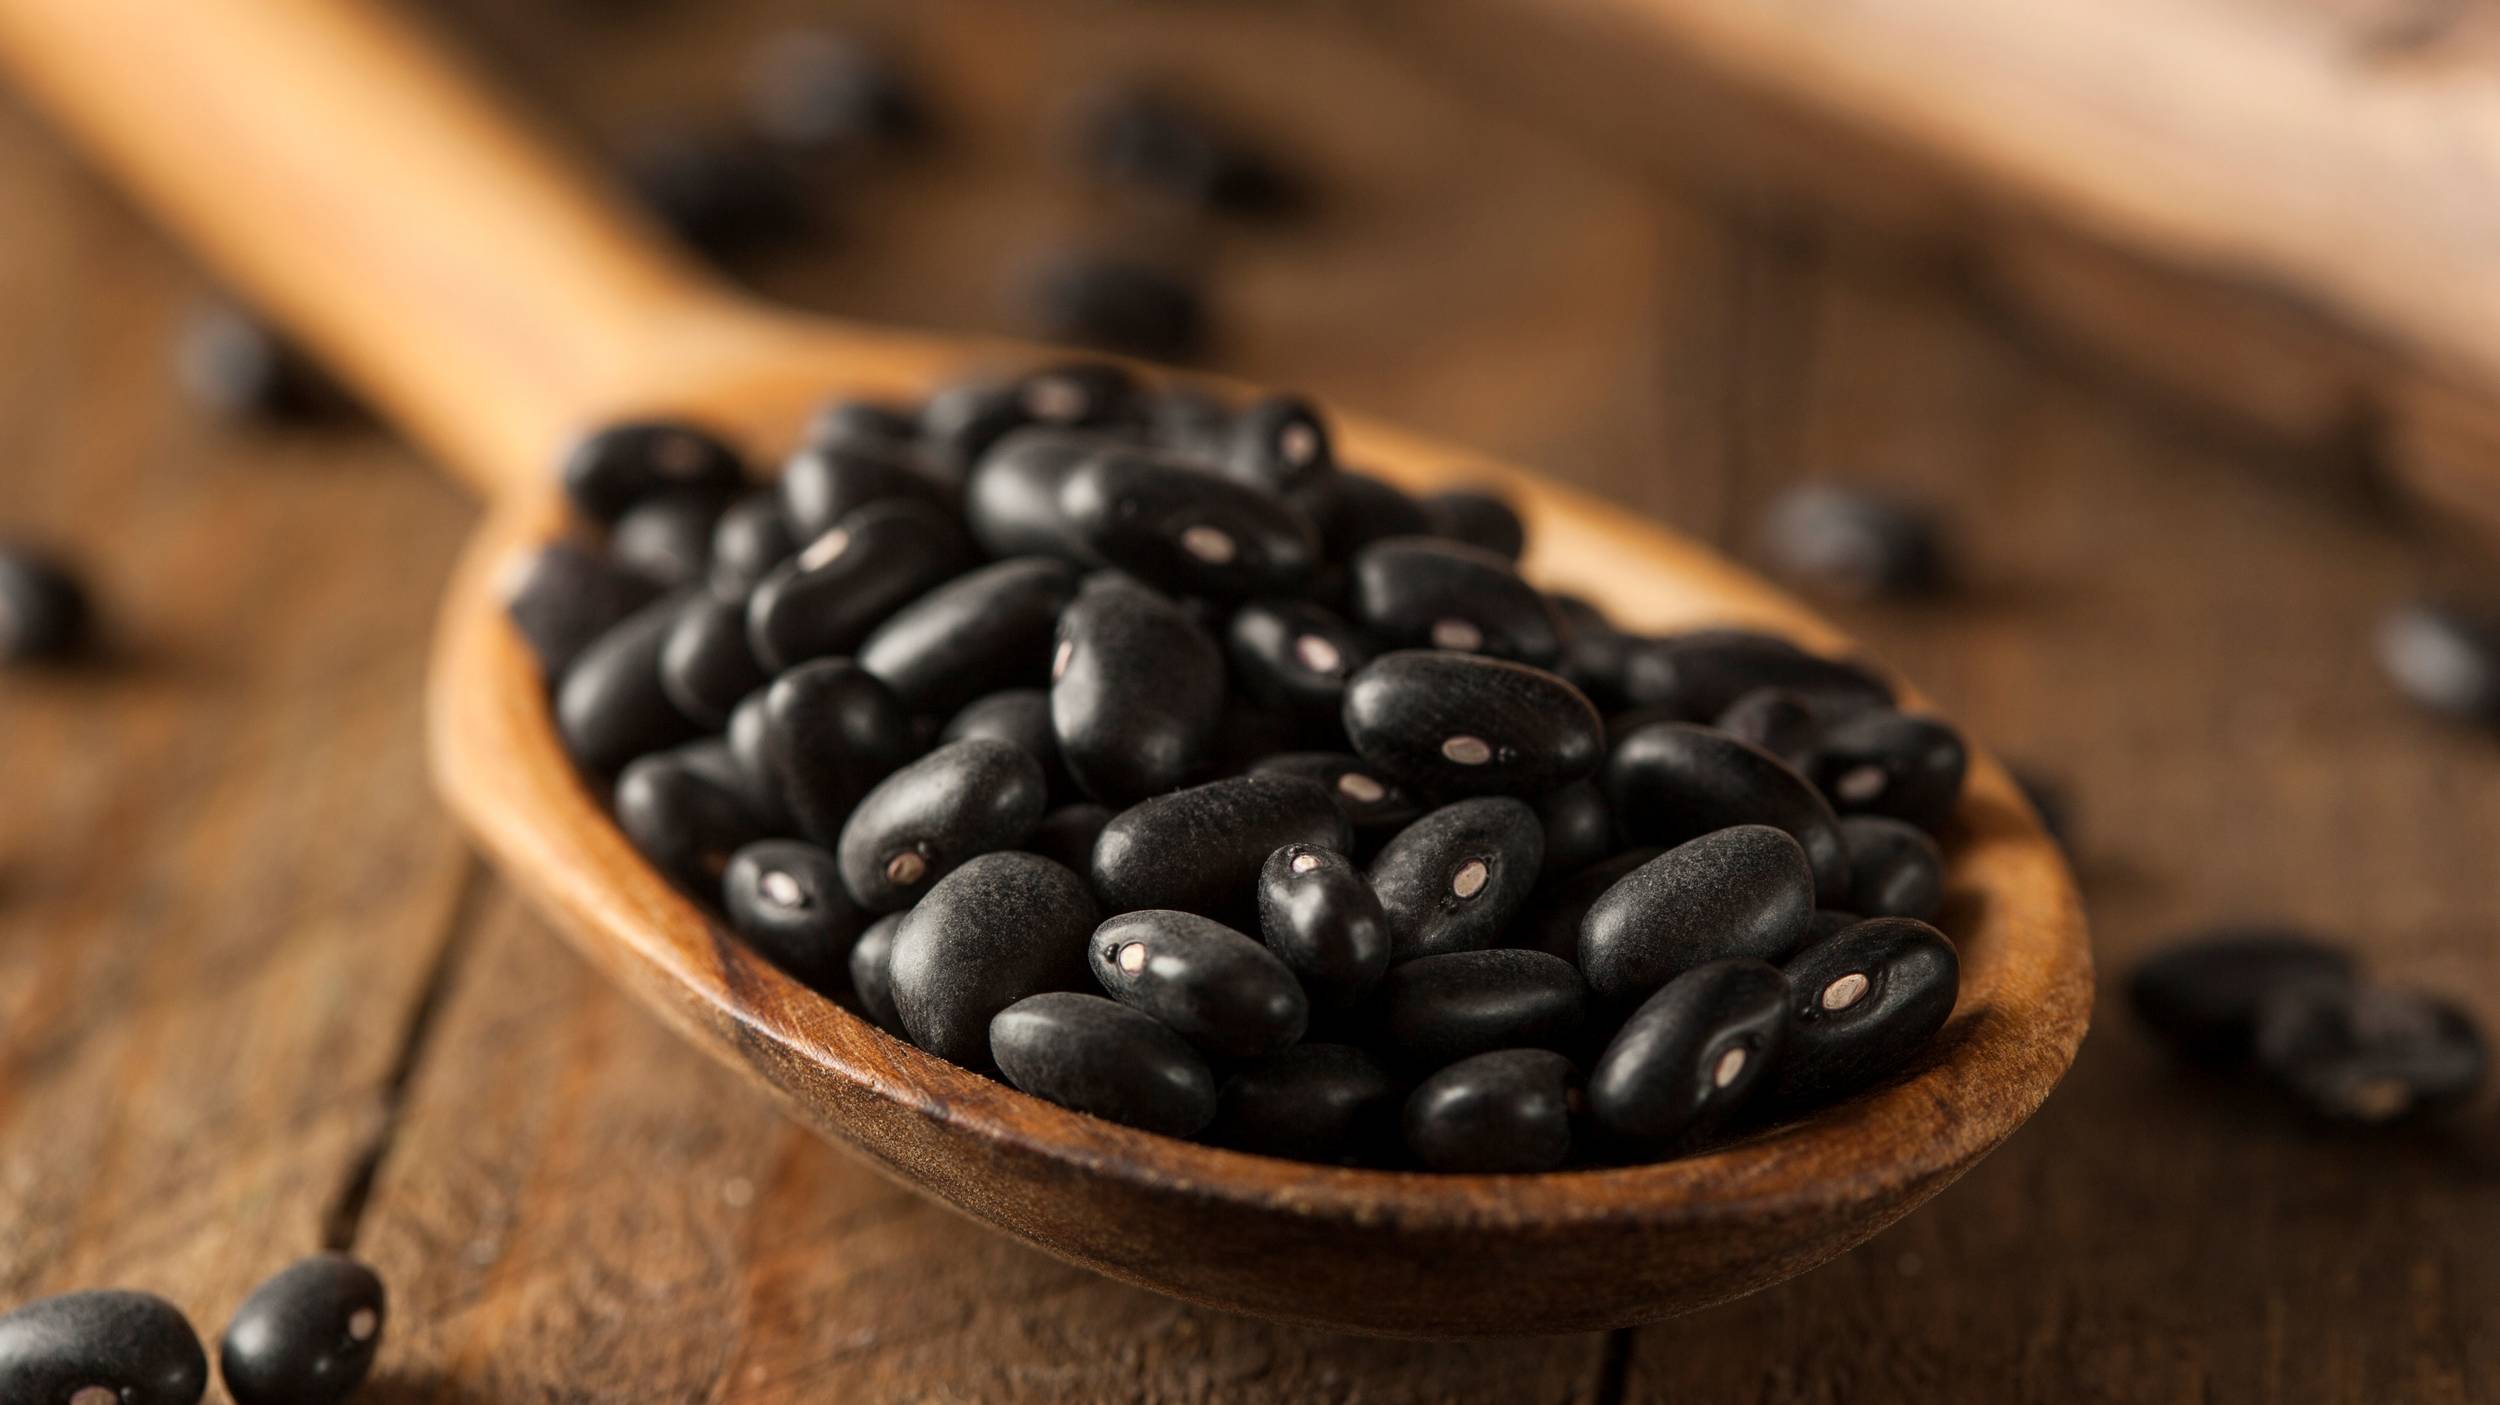 Black beans make the perfect accompaniment to meat-based dishes or as a vegan meal.